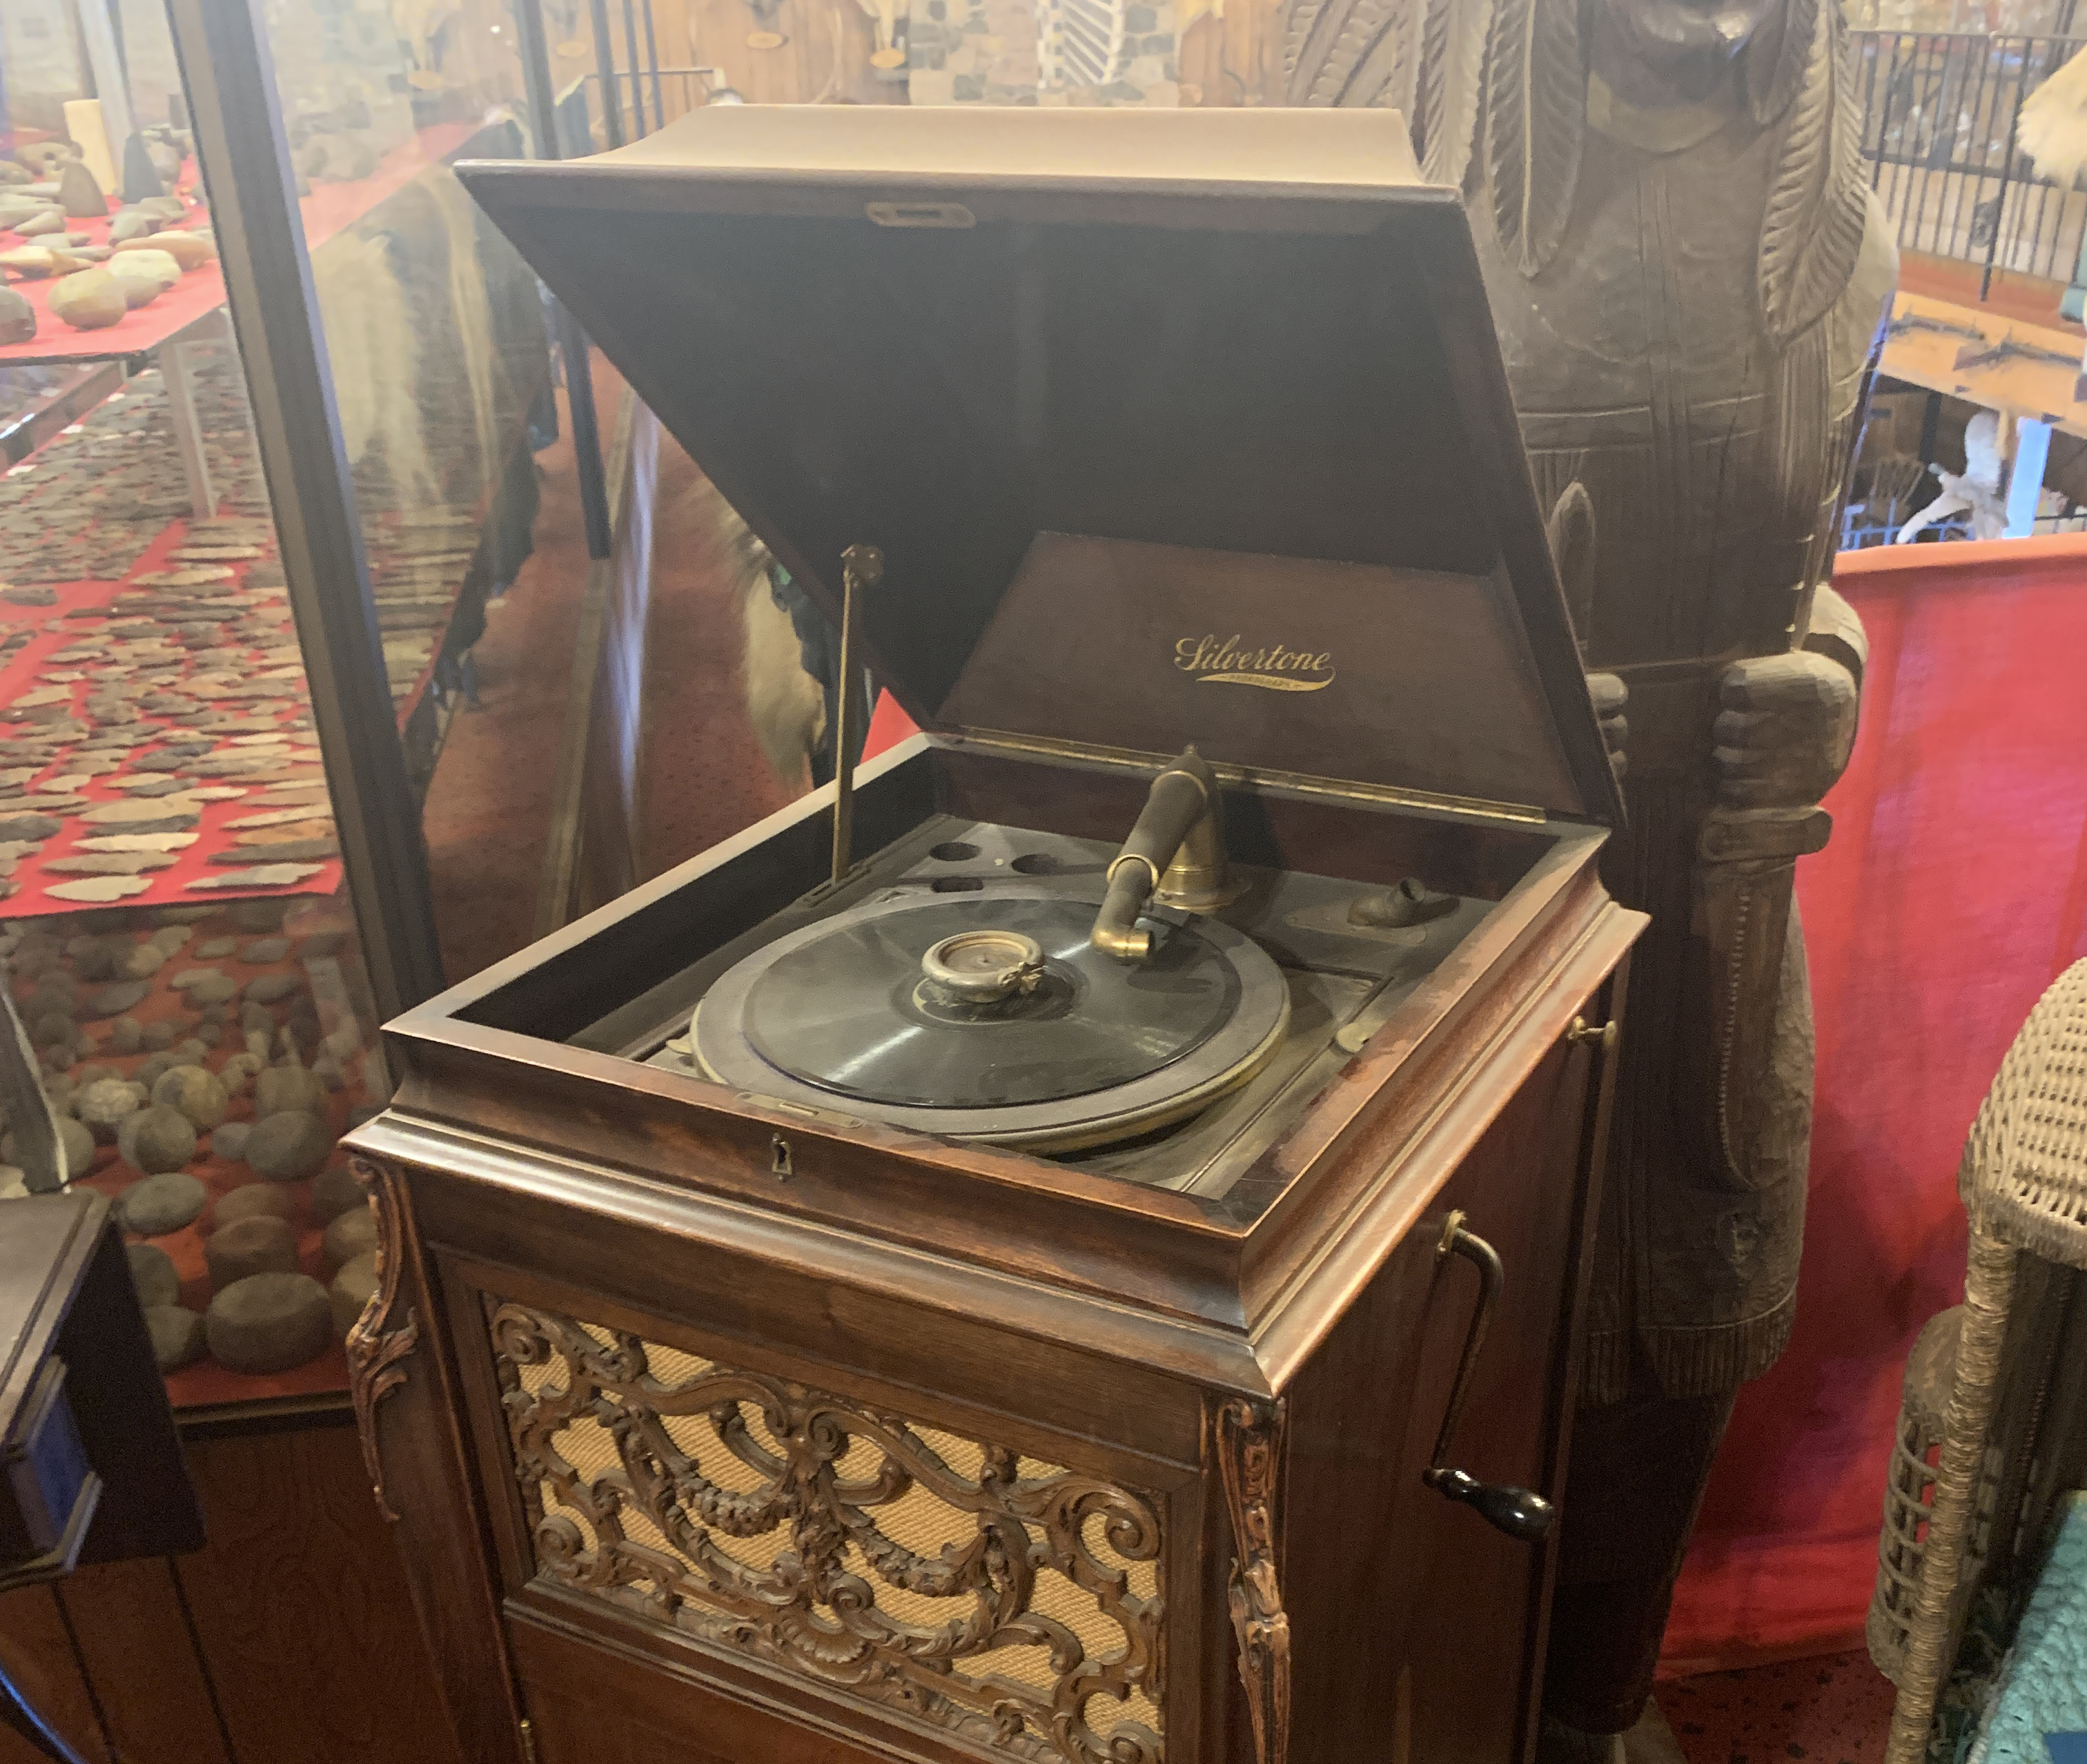 A record player powered by a hand crank.  Photo Source: Space Farms